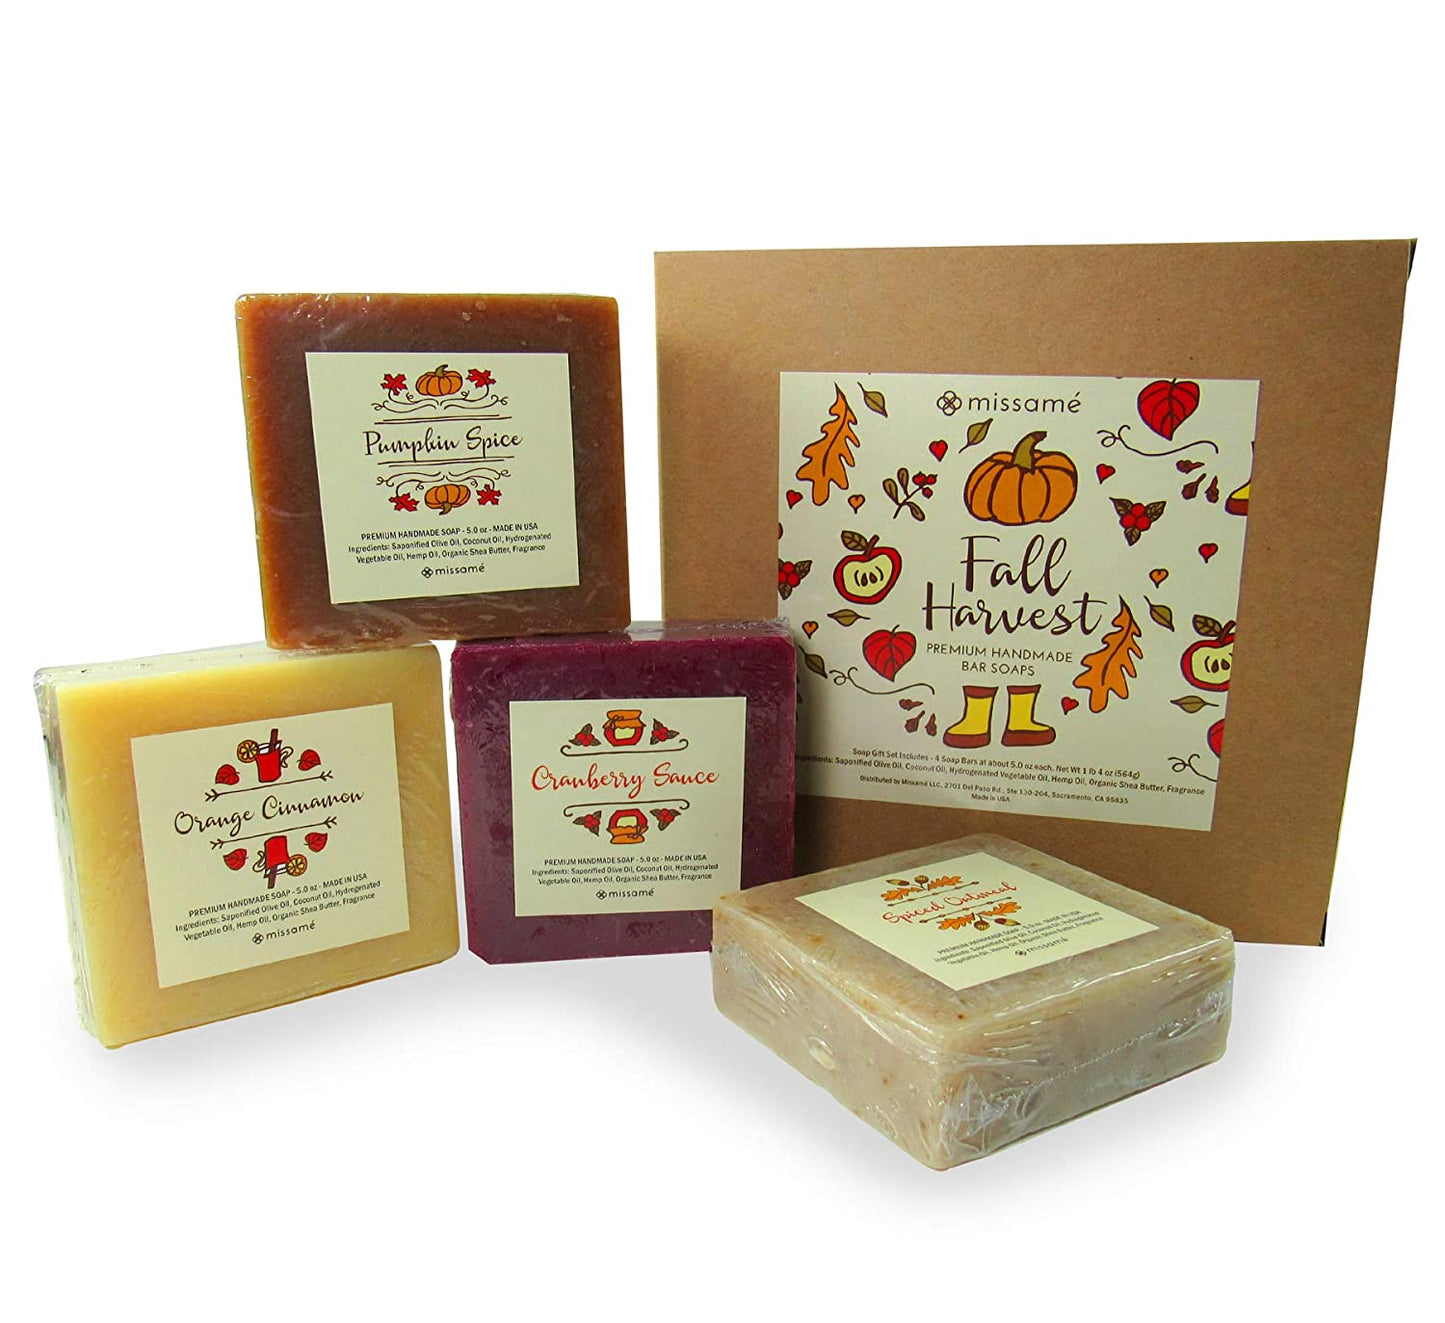 Pumpkin Spice, Cranberry, Oatmeal and Orange Cinnamon Scented Handmade Bar Soap Gift Set, 4 Full Sized Bars 5.0 oz Each, Saponified Olive Oil Base